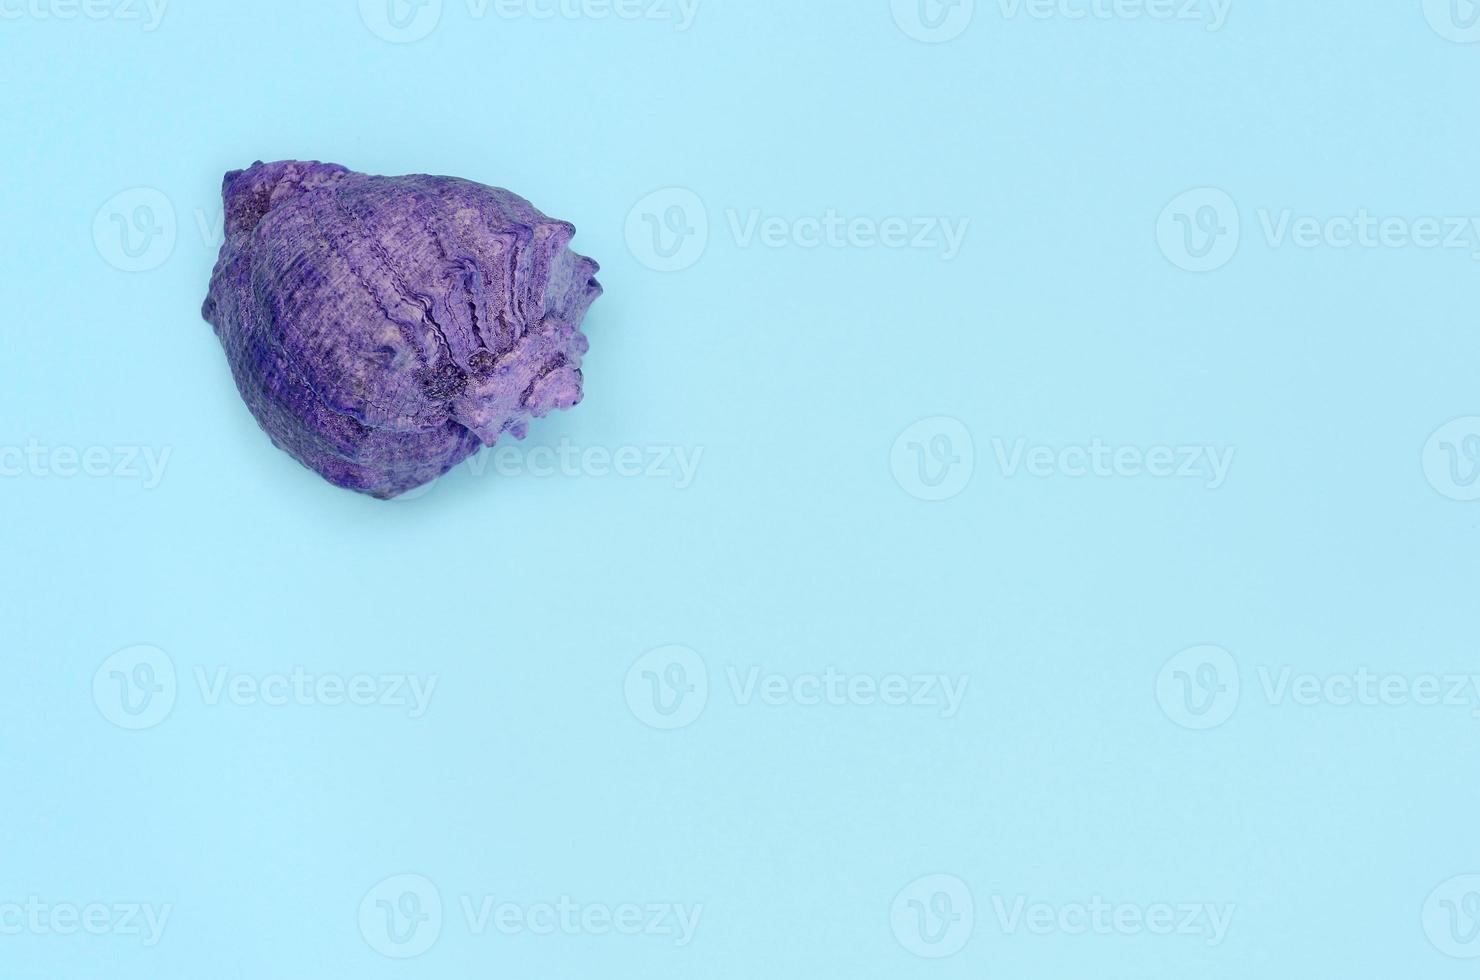 Violet sea shell lie on texture background of fashion pastel blue color paper photo